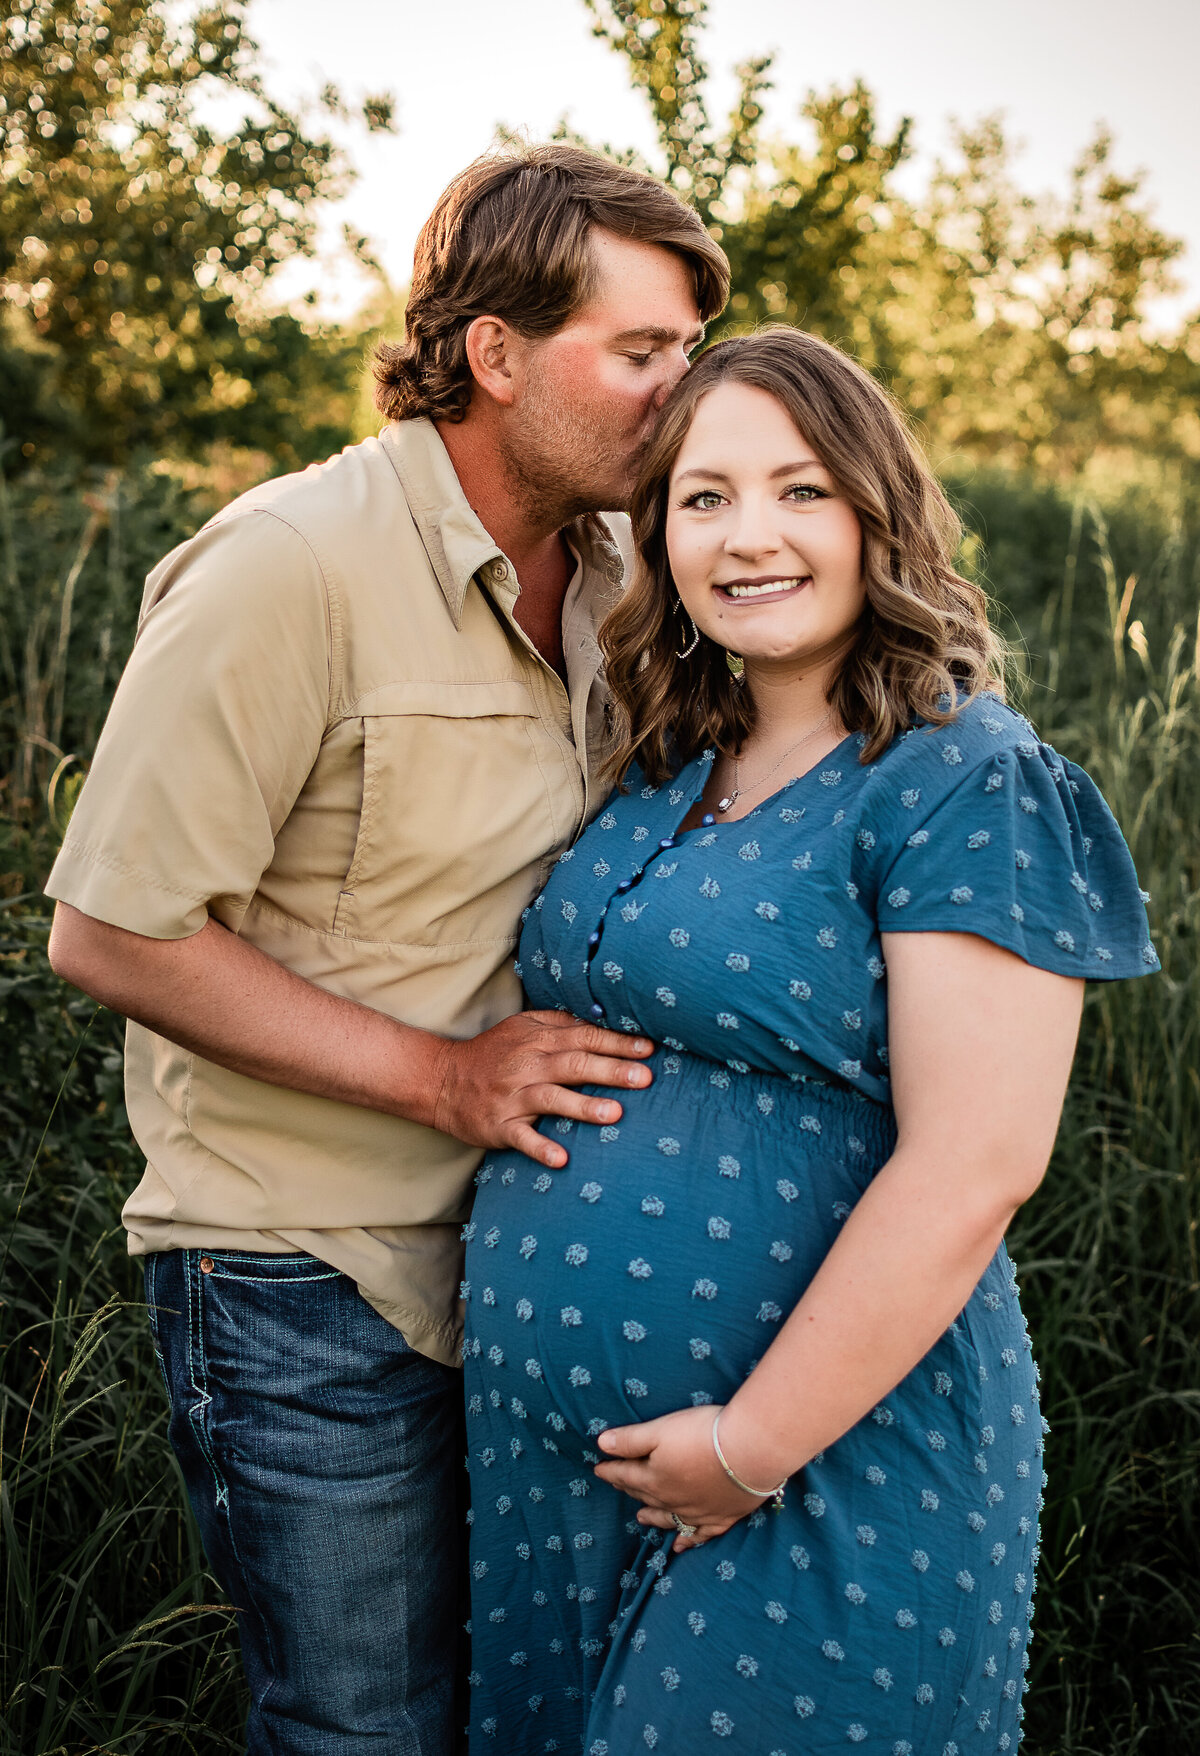 An mother to be smiles at the camera as her husband kisses her cheek and cradles her baby bump.